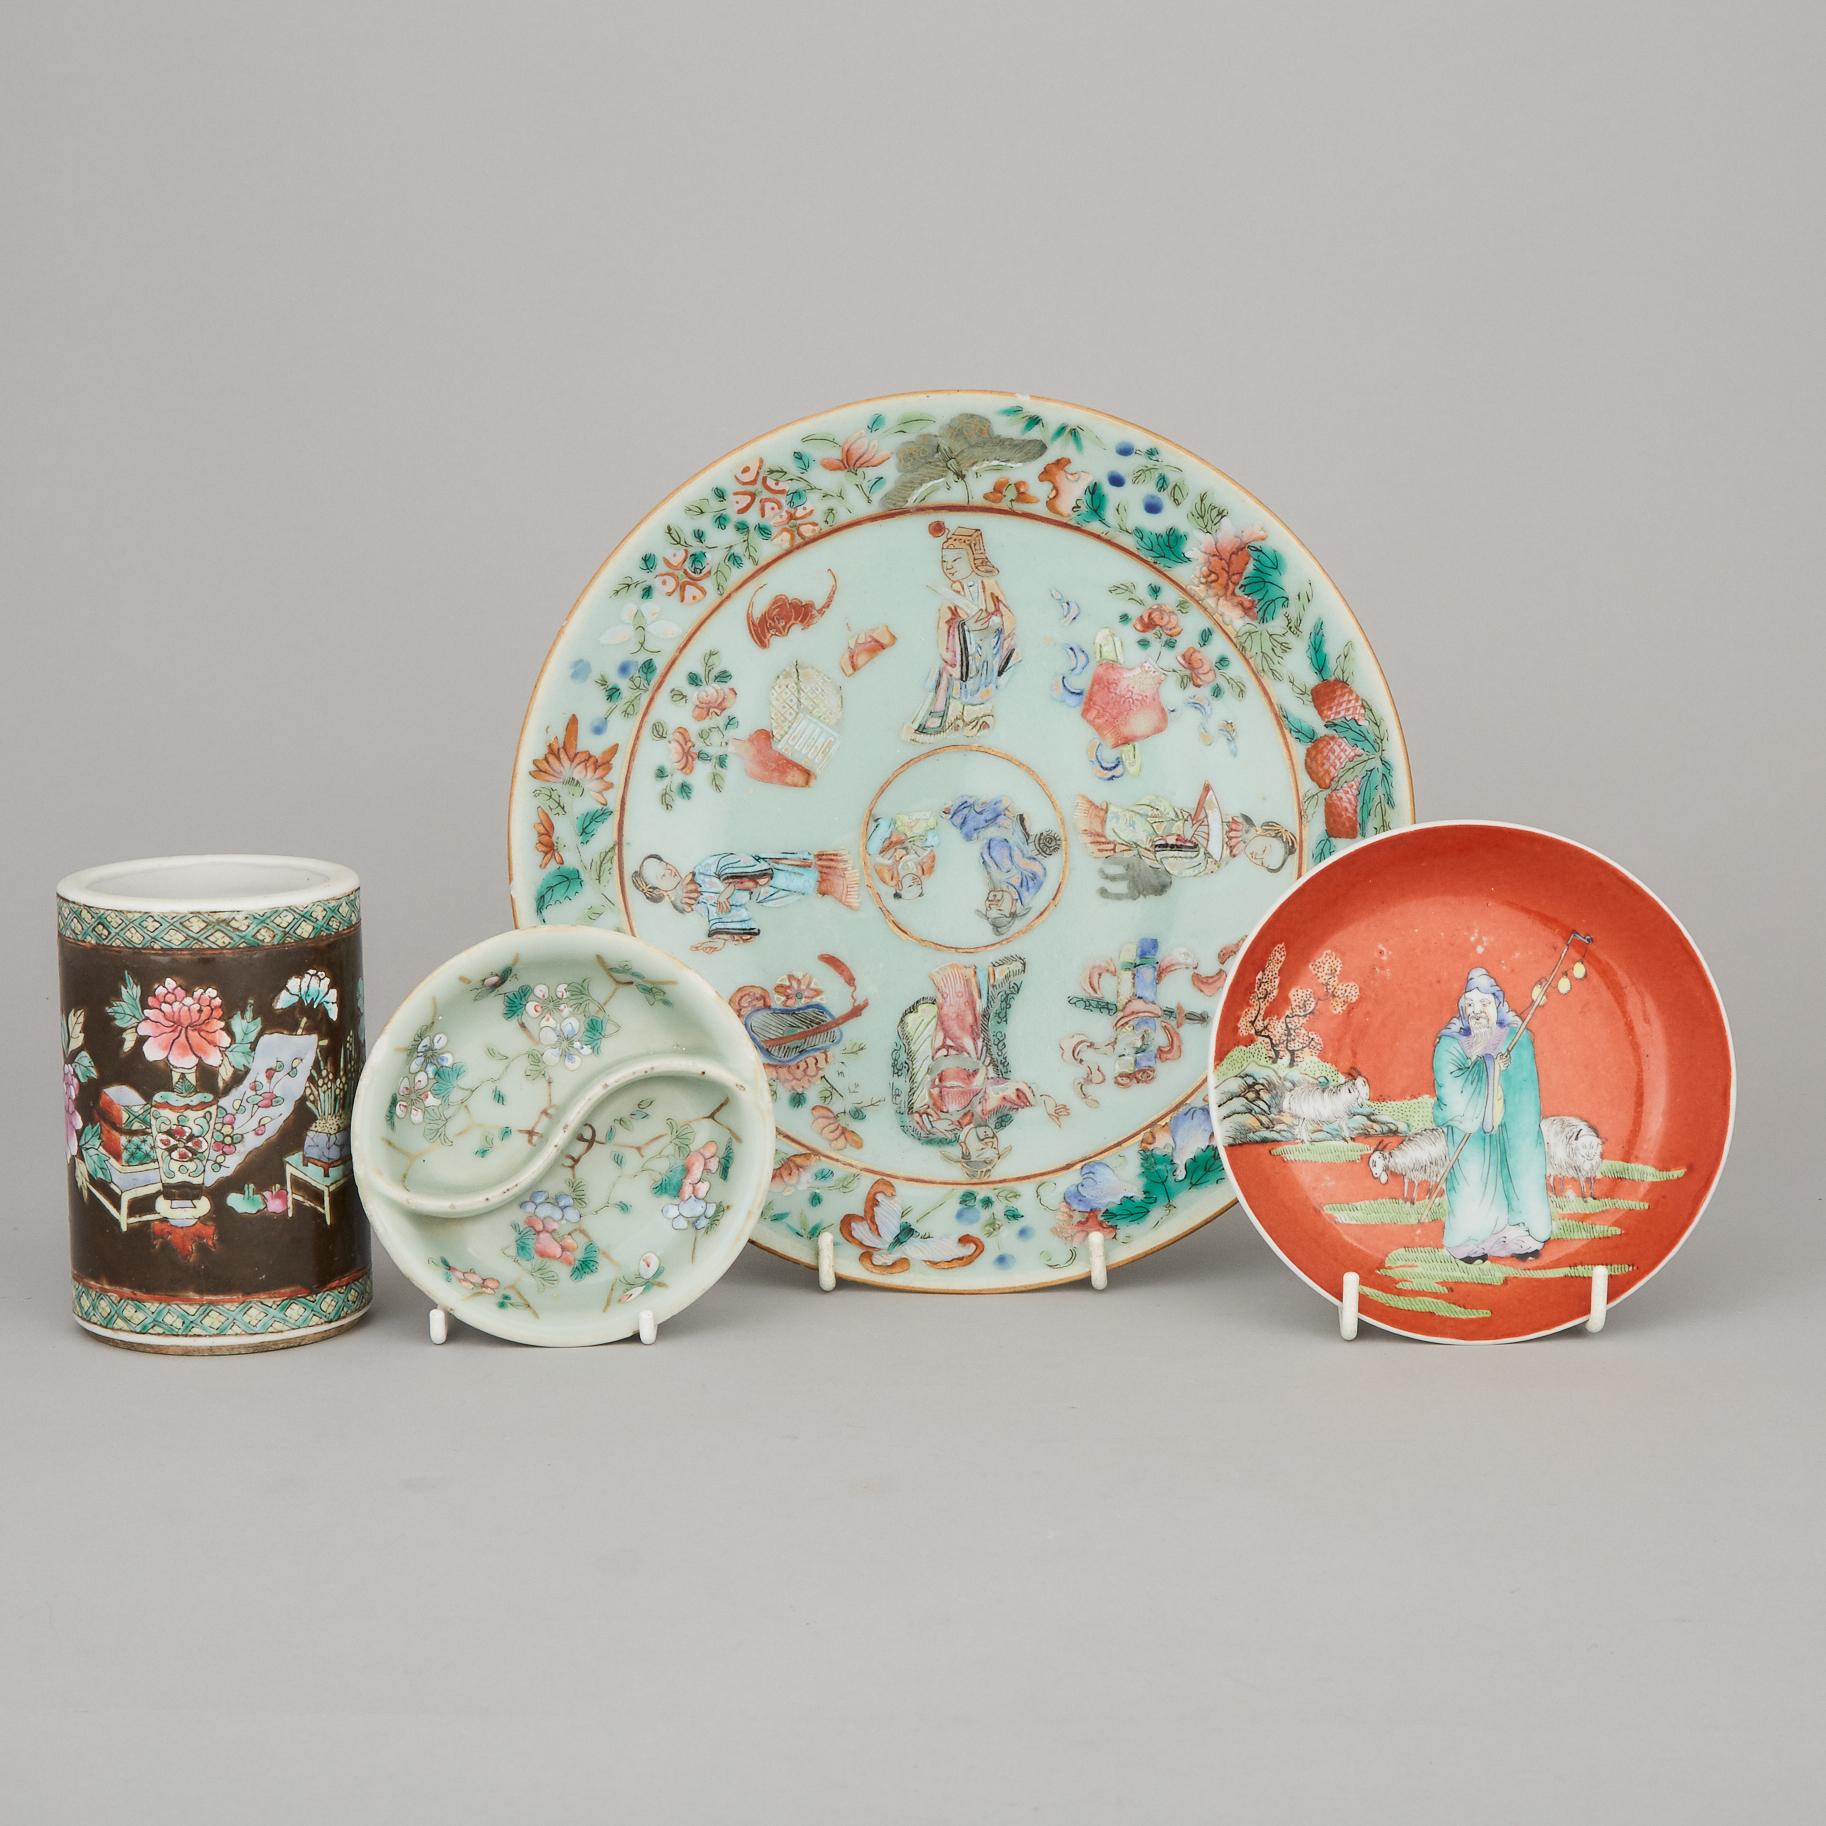 A Group of Four Porcelain Wares, 19th/Early 20th Century